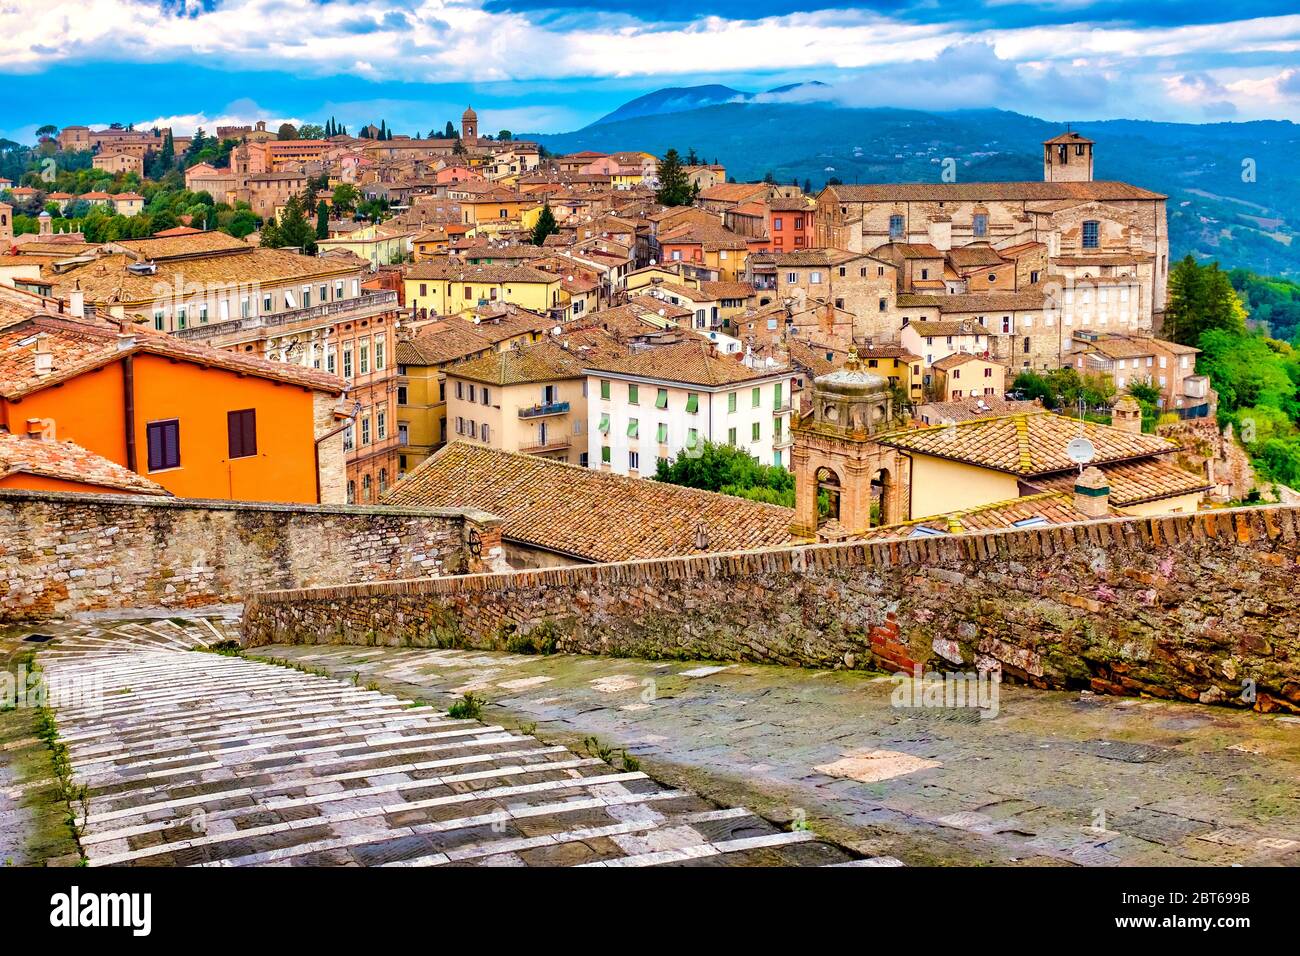 Porta Sole, one of the oldest access point to Perugia, Italy Stock Photo -  Alamy